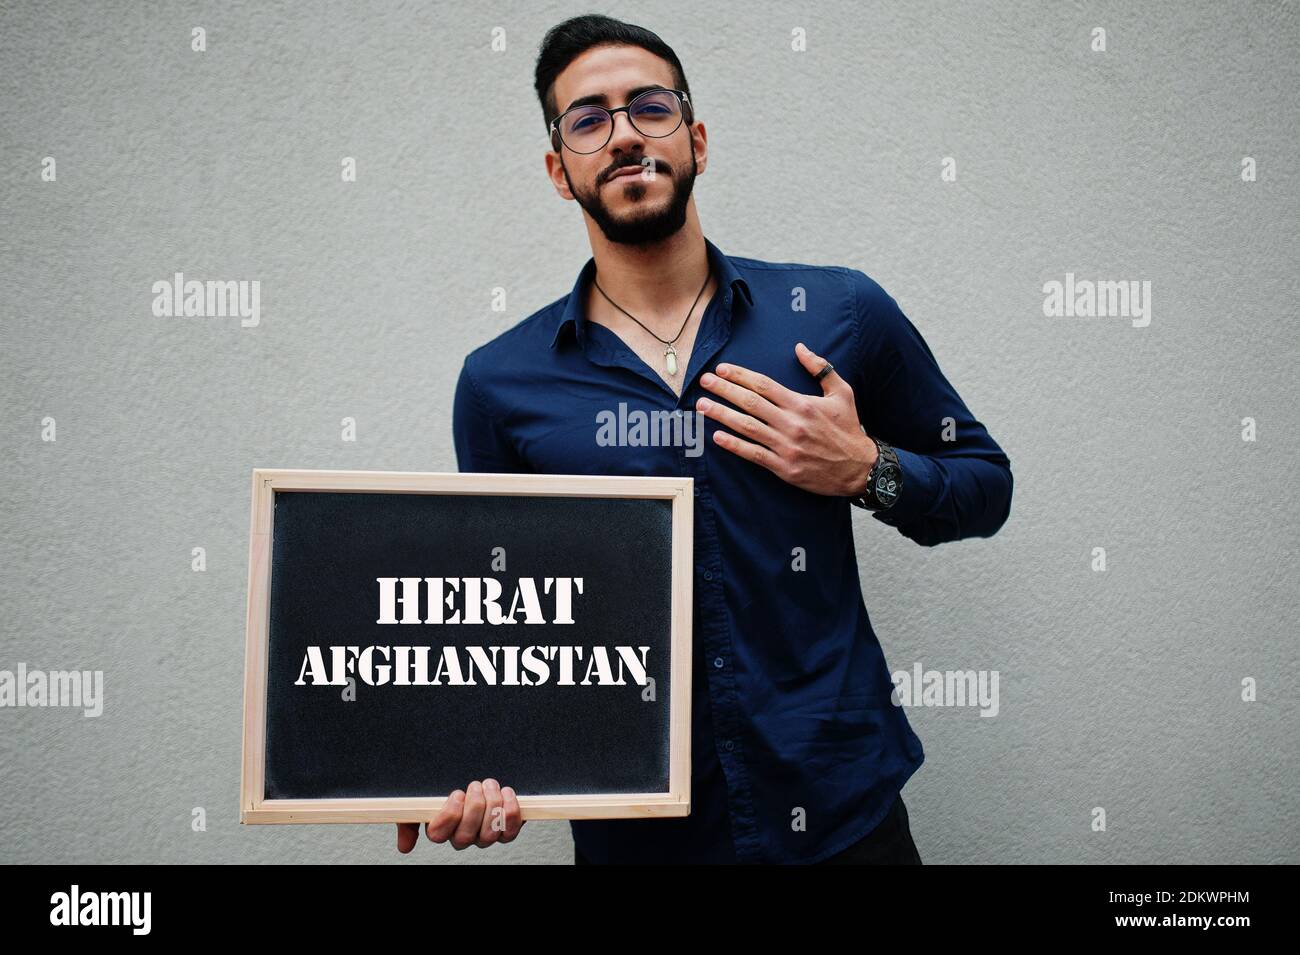 Arab man wear blue shirt and eyeglasses hold board with Herat Afghanistan inscription. Largest cities in islamic world concept. Stock Photo